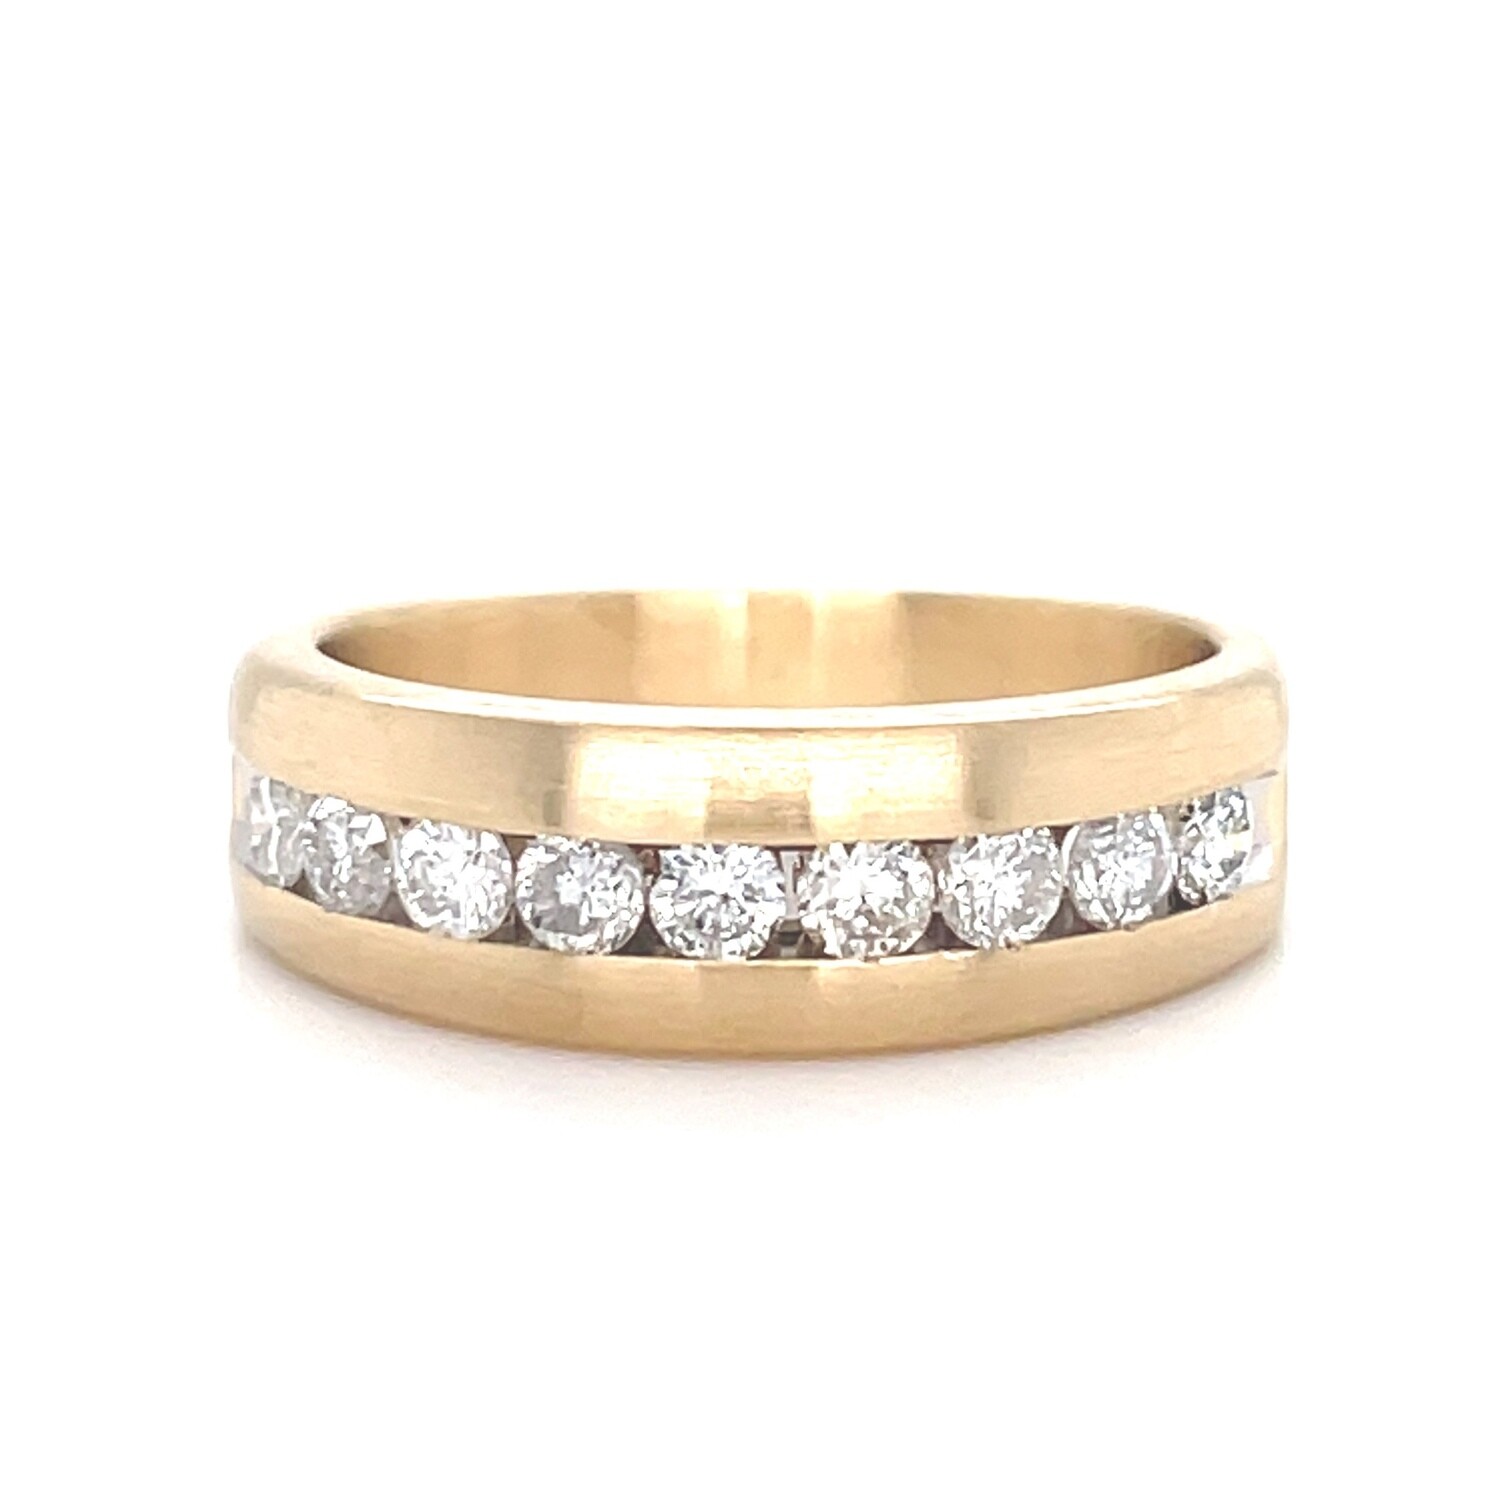 Diamond Channel-Set Band in 14k Yellow Gold — 1/4ctw